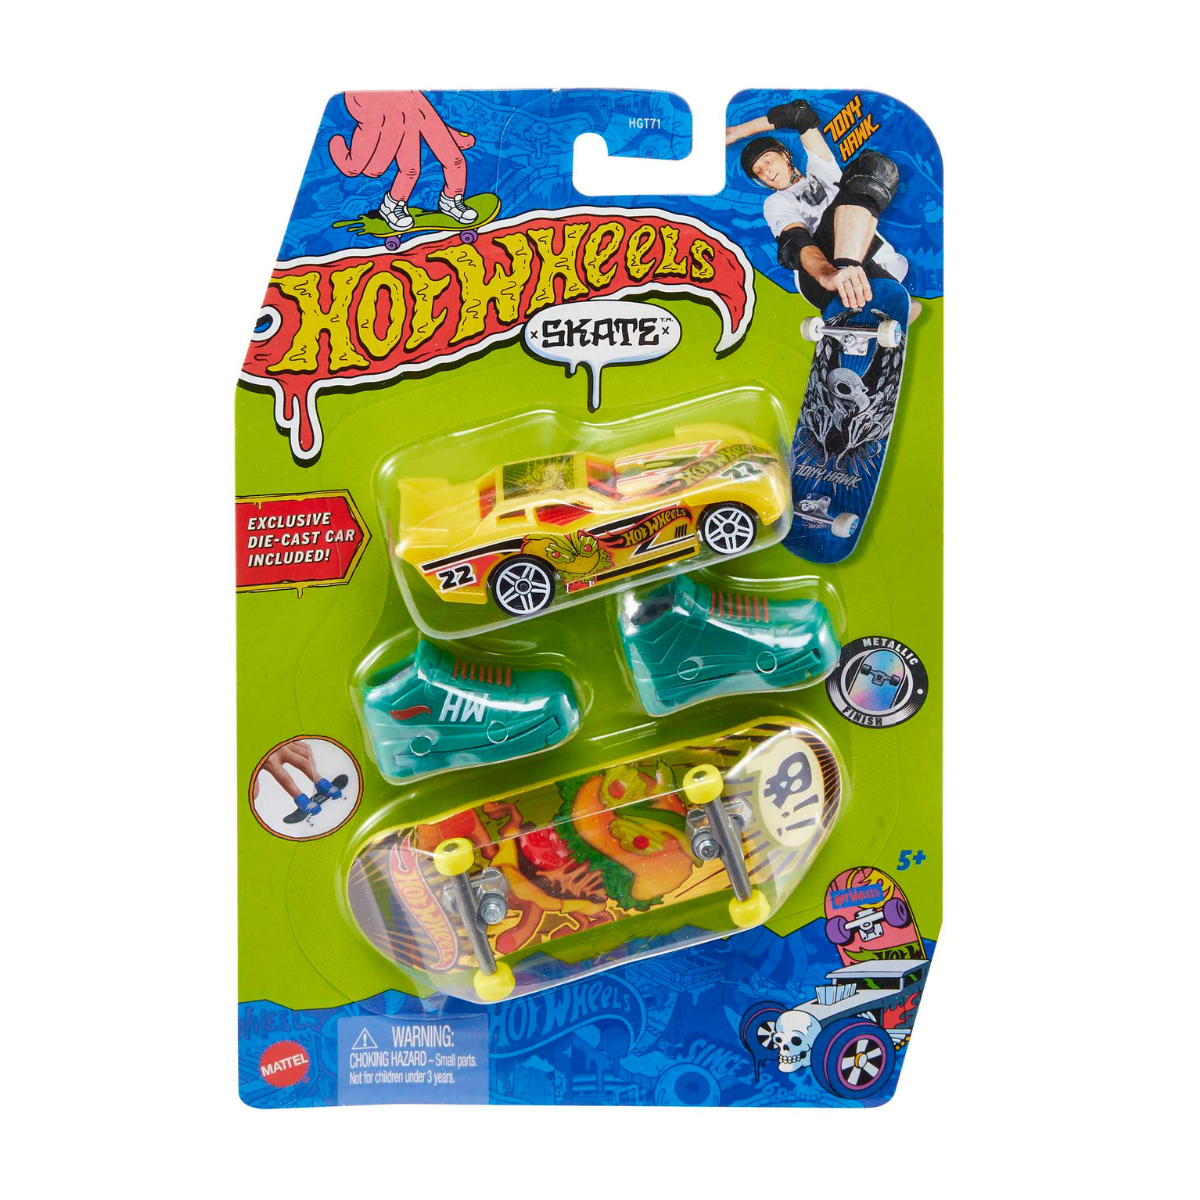 Hot Wheels Coche Pack 20 Vehículos - ToysManiatic